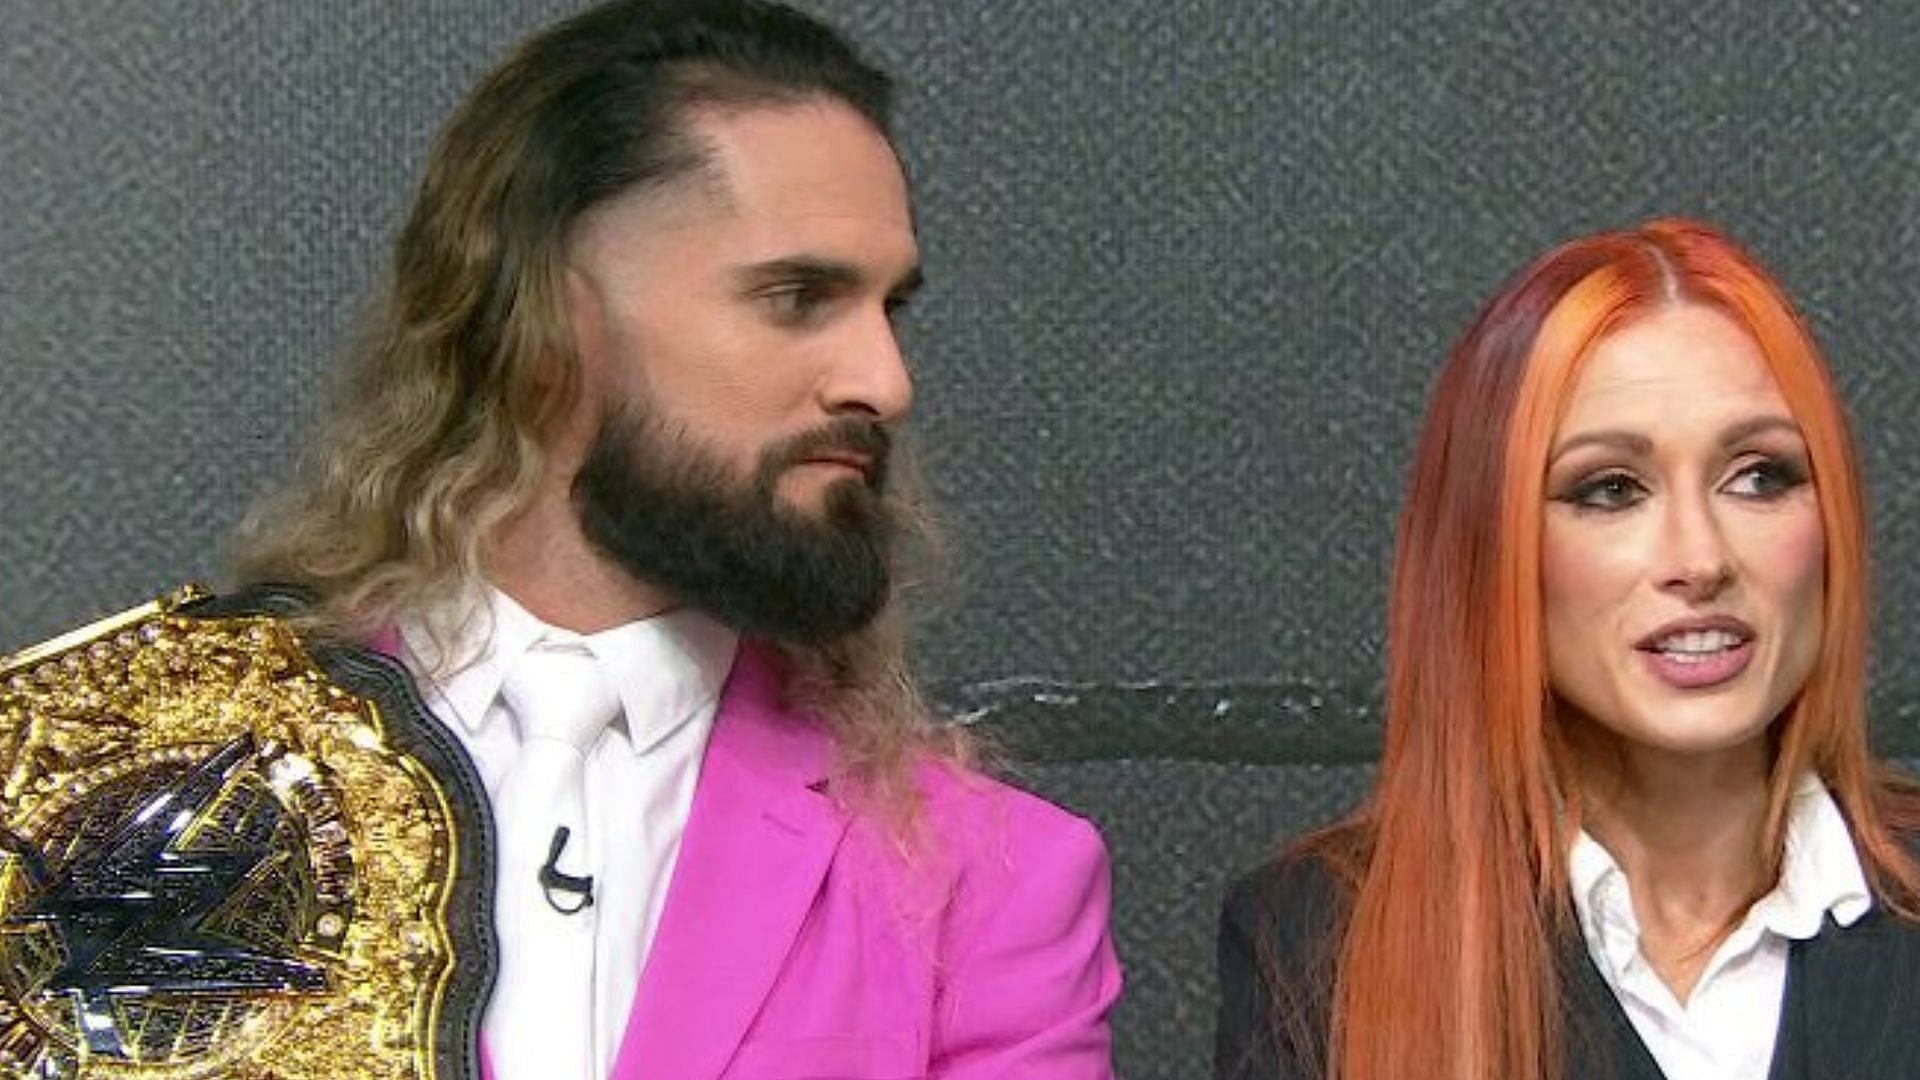 Seth Rollins and Becky Lynch are husband and wife